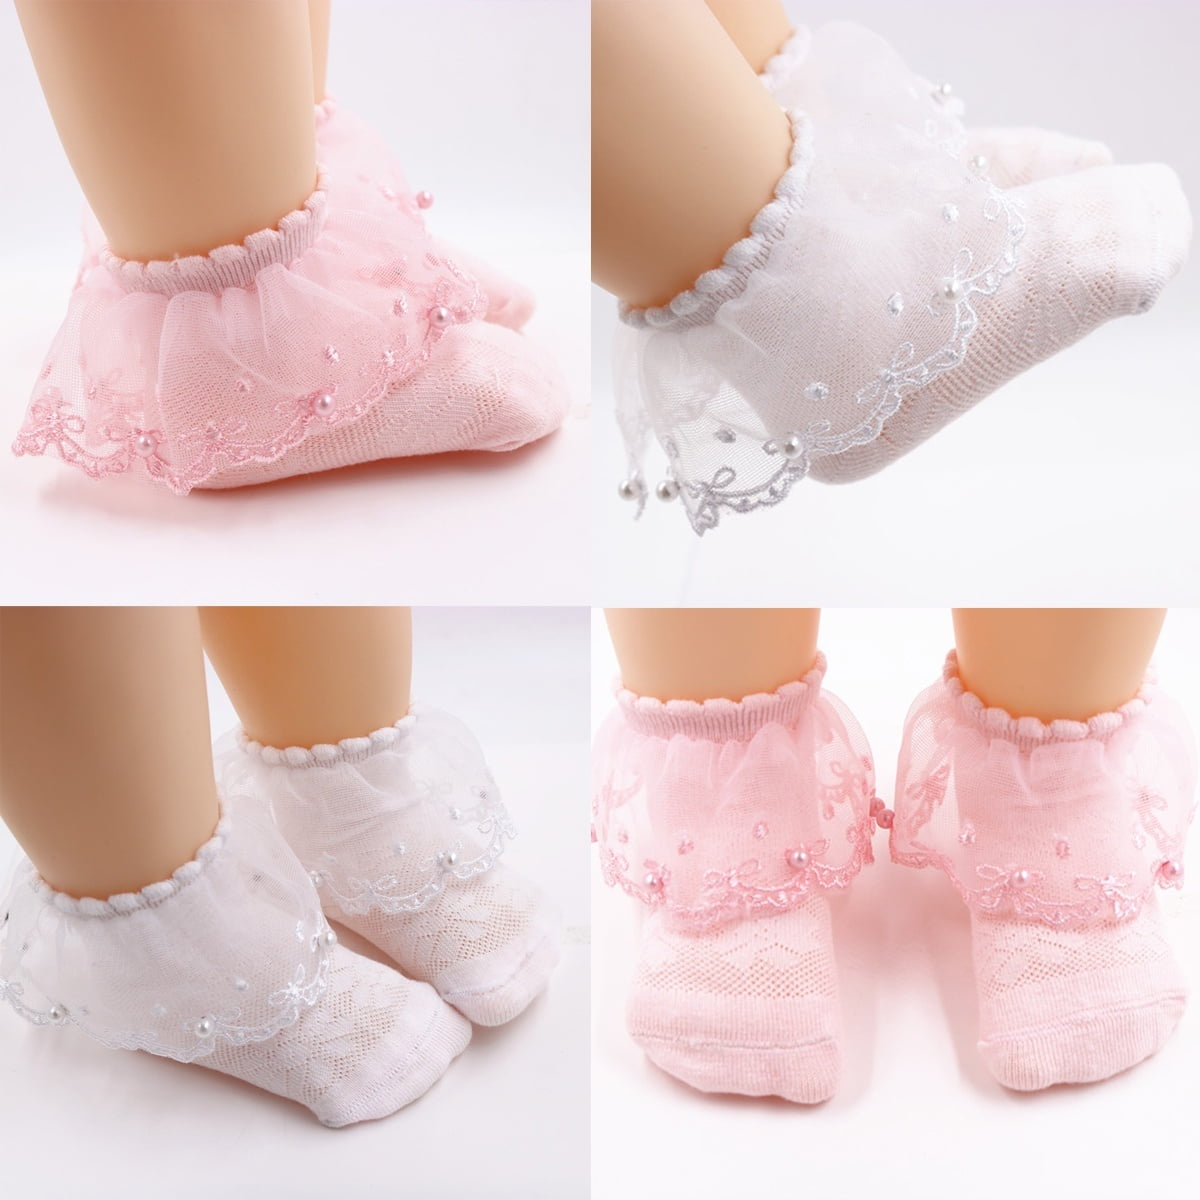 Cute Elastic Girls Infant Cotton Lace Knitted Stockings Baby Ankle Socks